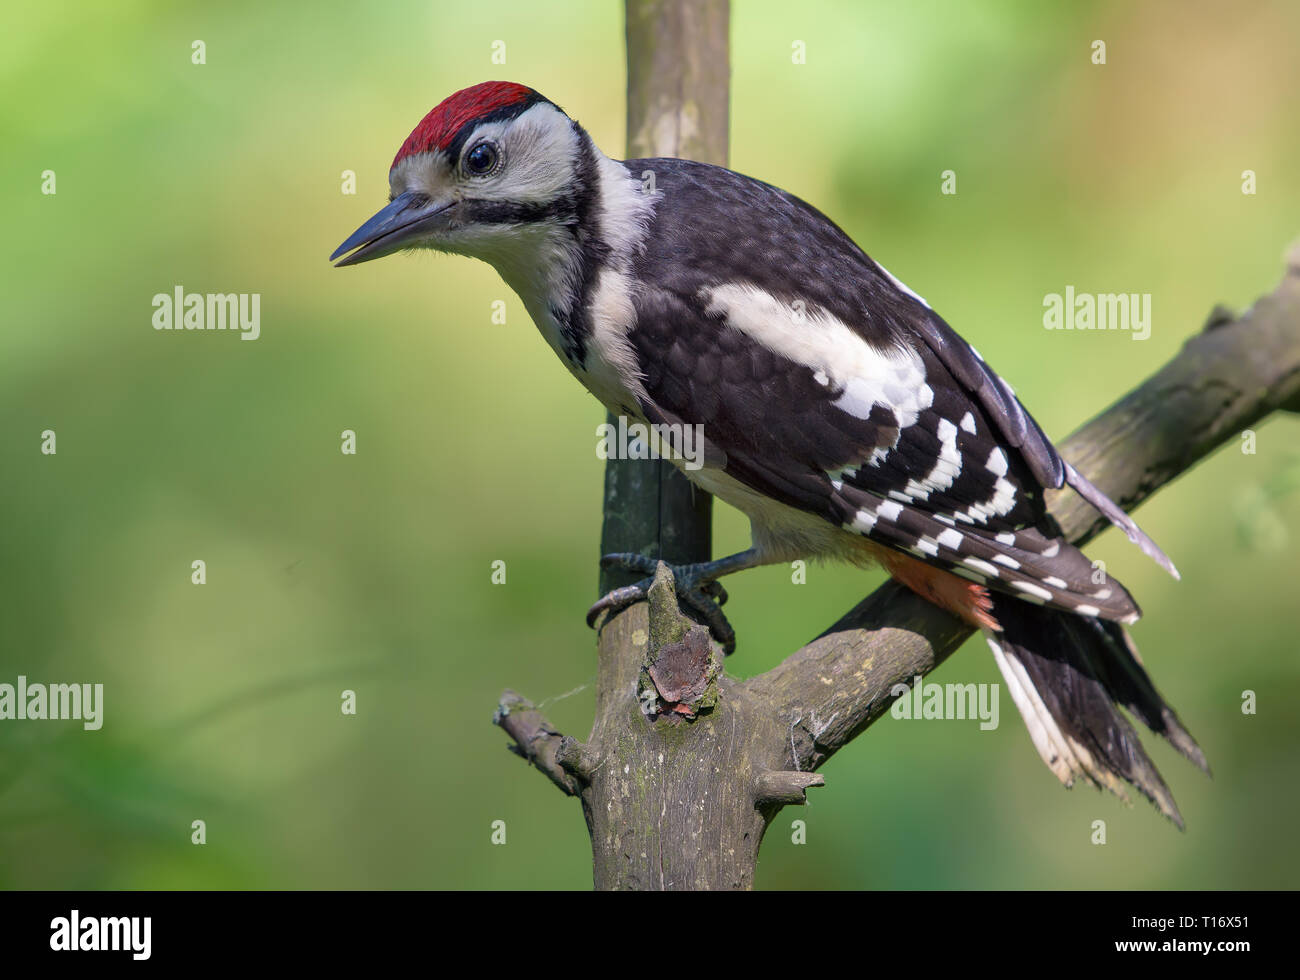 Young Great spotted woodpecker posing on a dry little branch Stock Photo